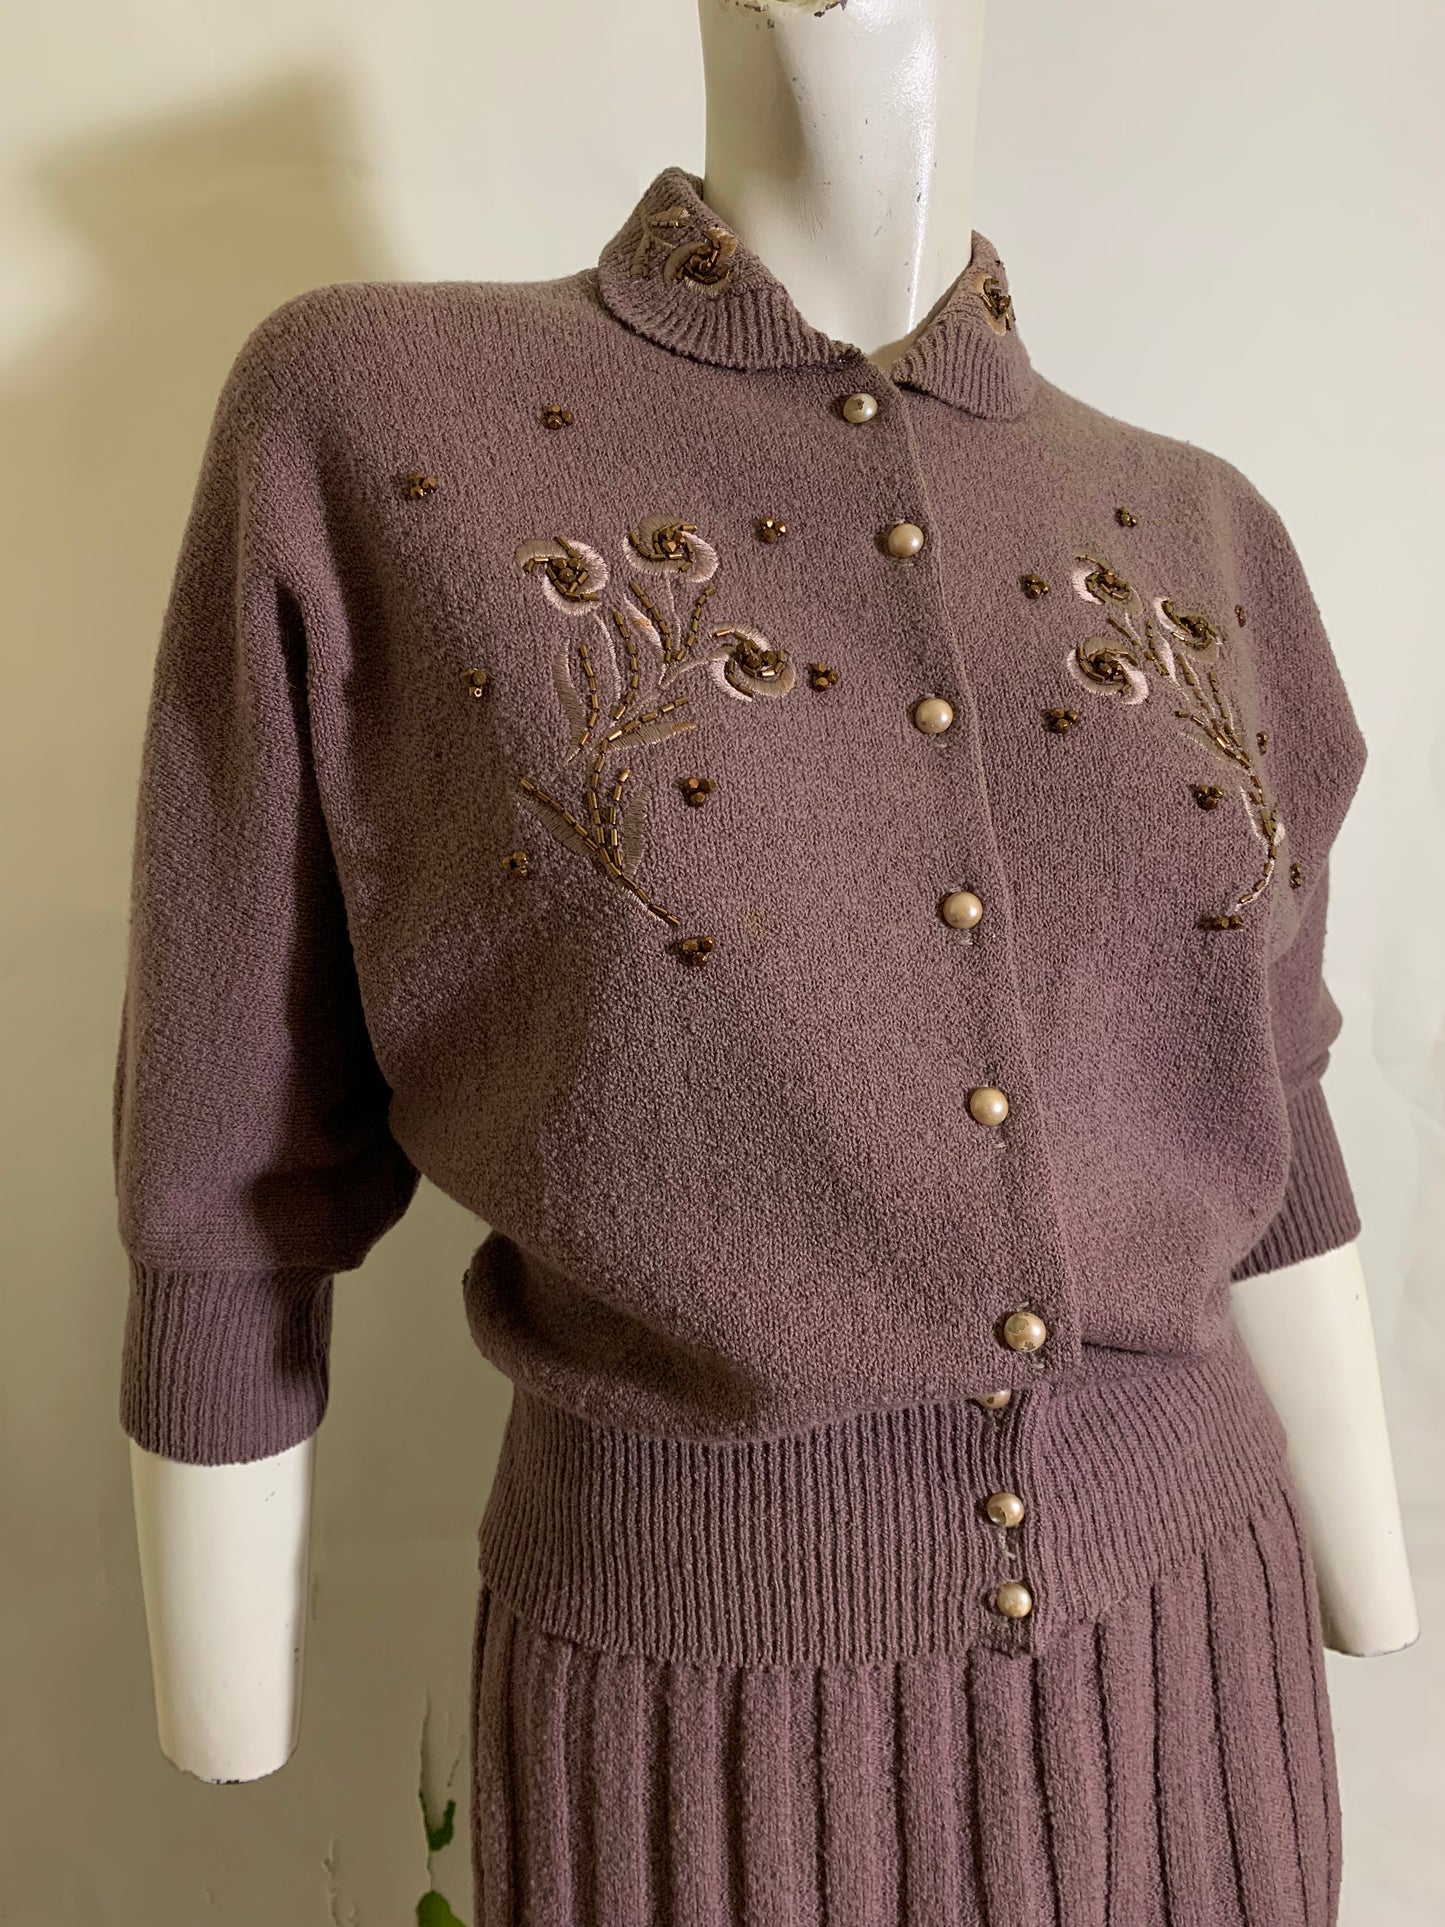 Rosy Brown Boucle Knit Wool 2 Pc Dress Set with Beading and Embroidery circa 1940s